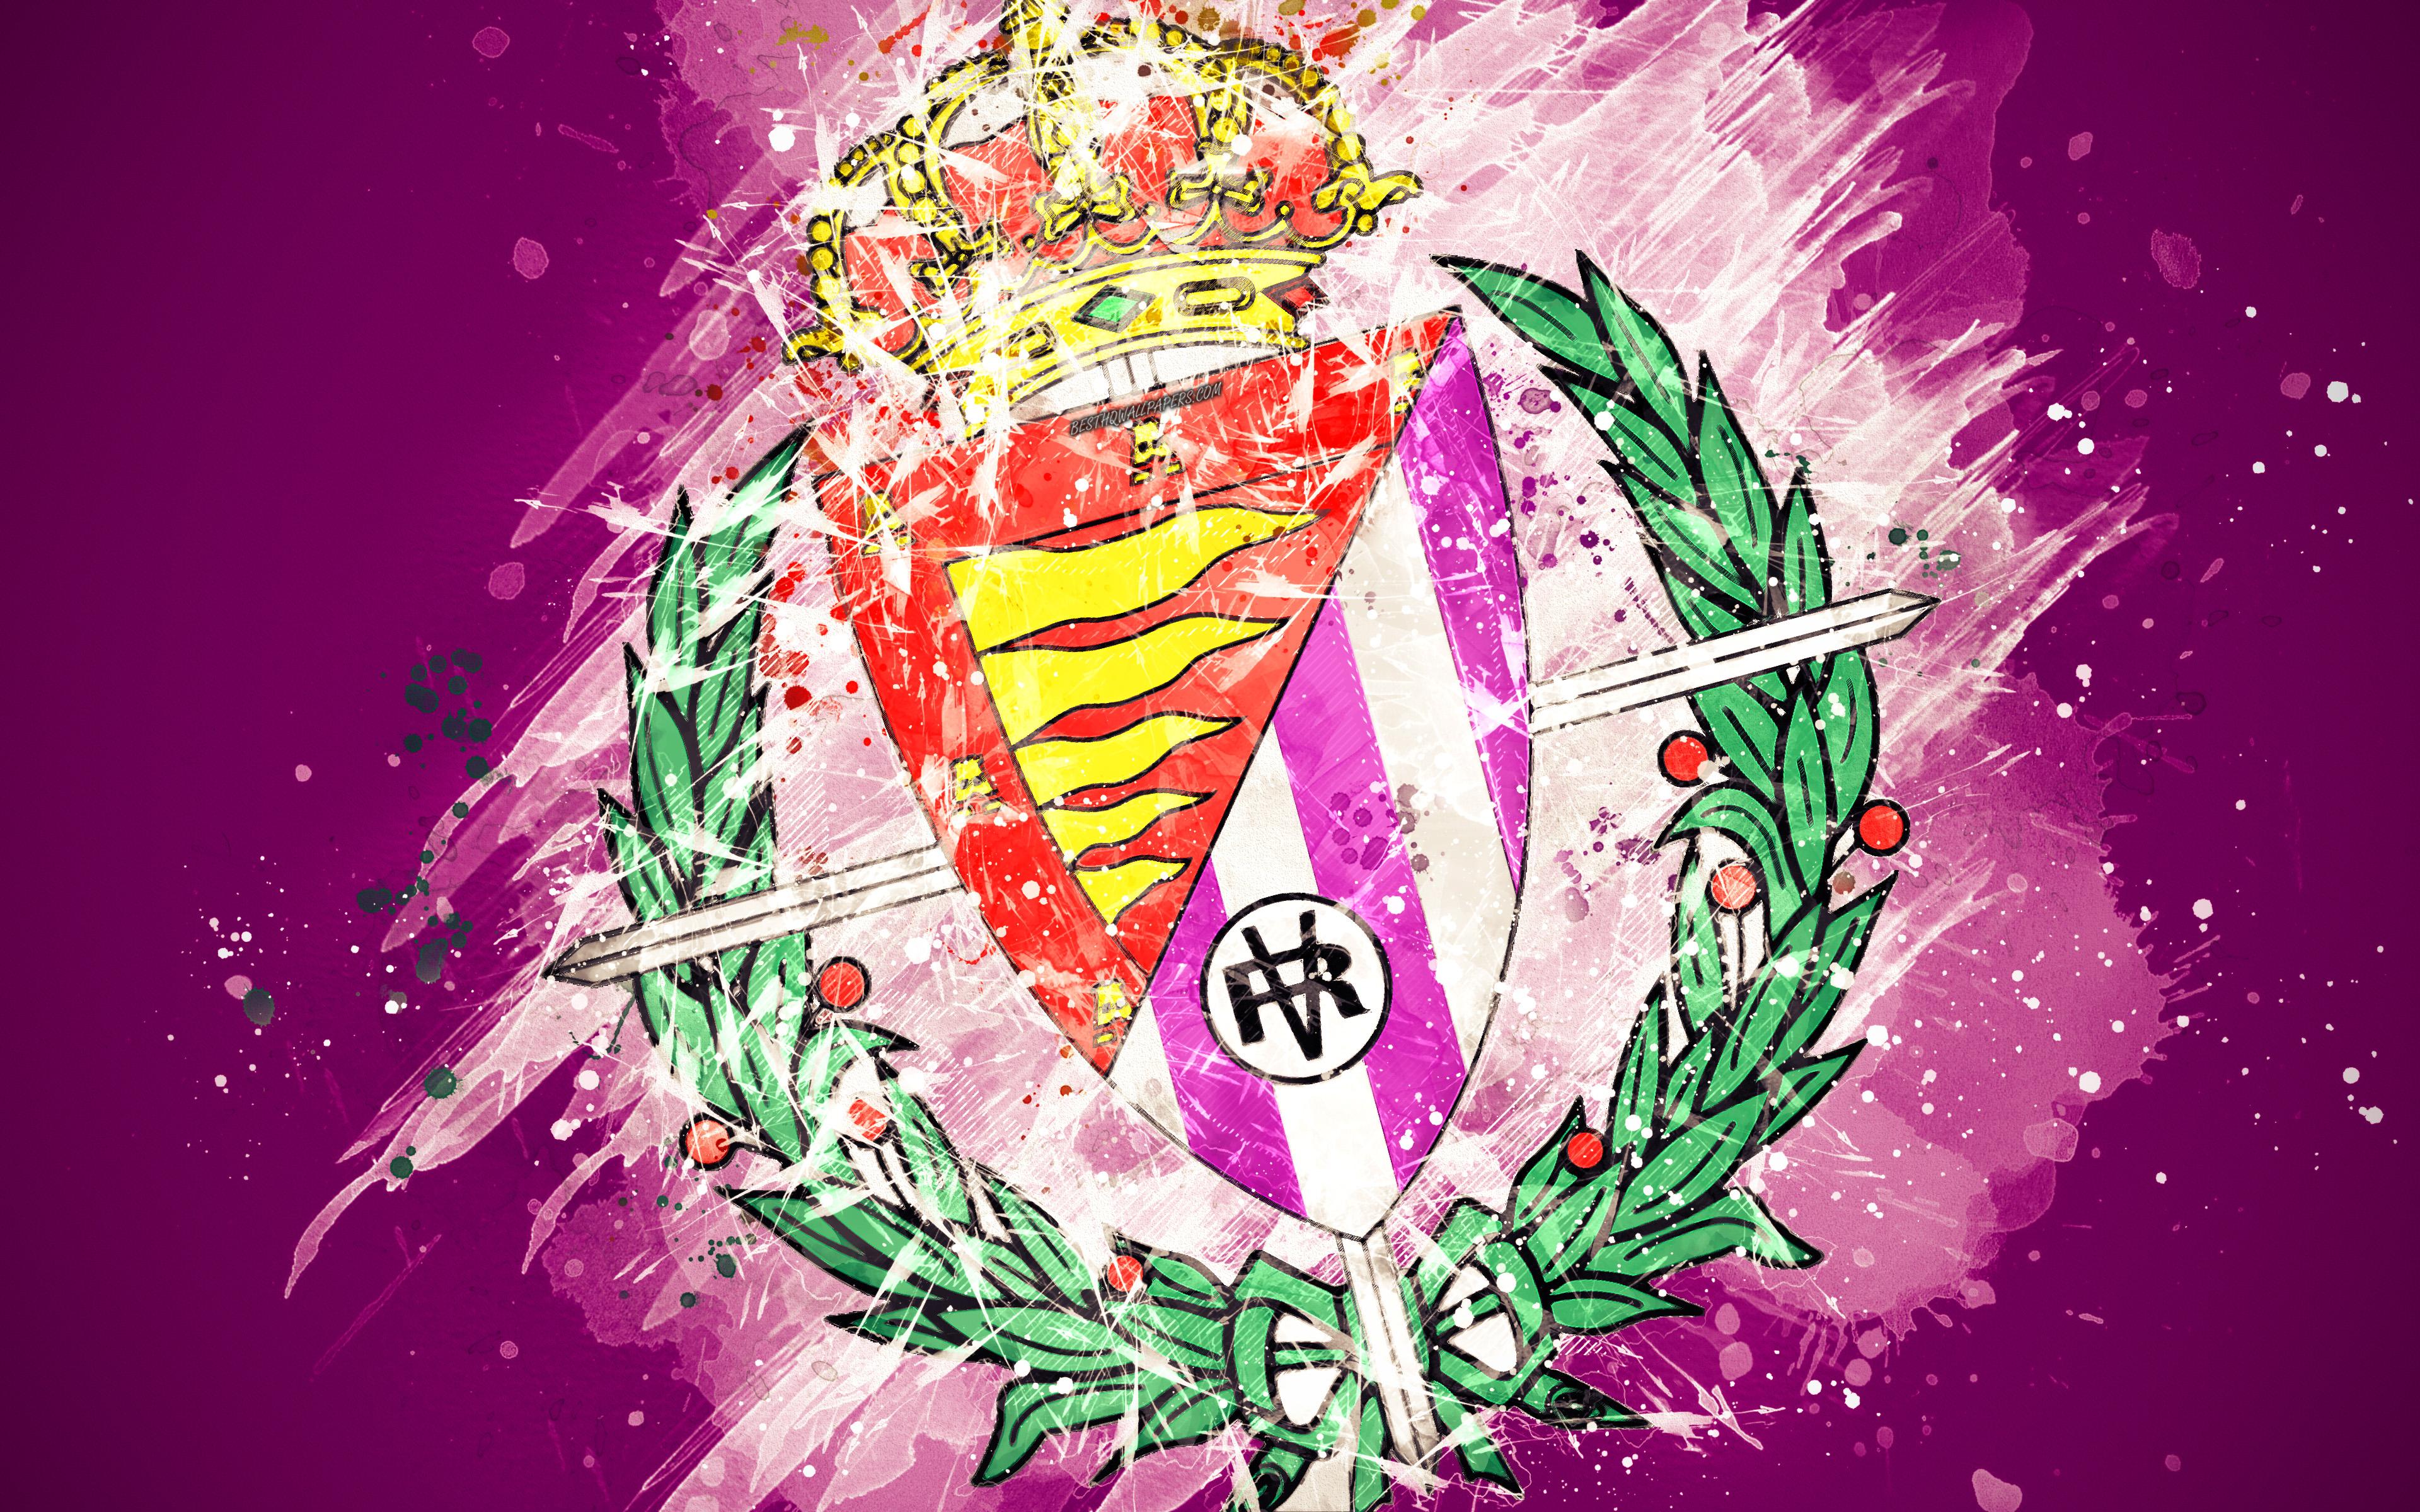 Real Valladolid 4k Ultra HD Wallpaper. Background Imagex2400